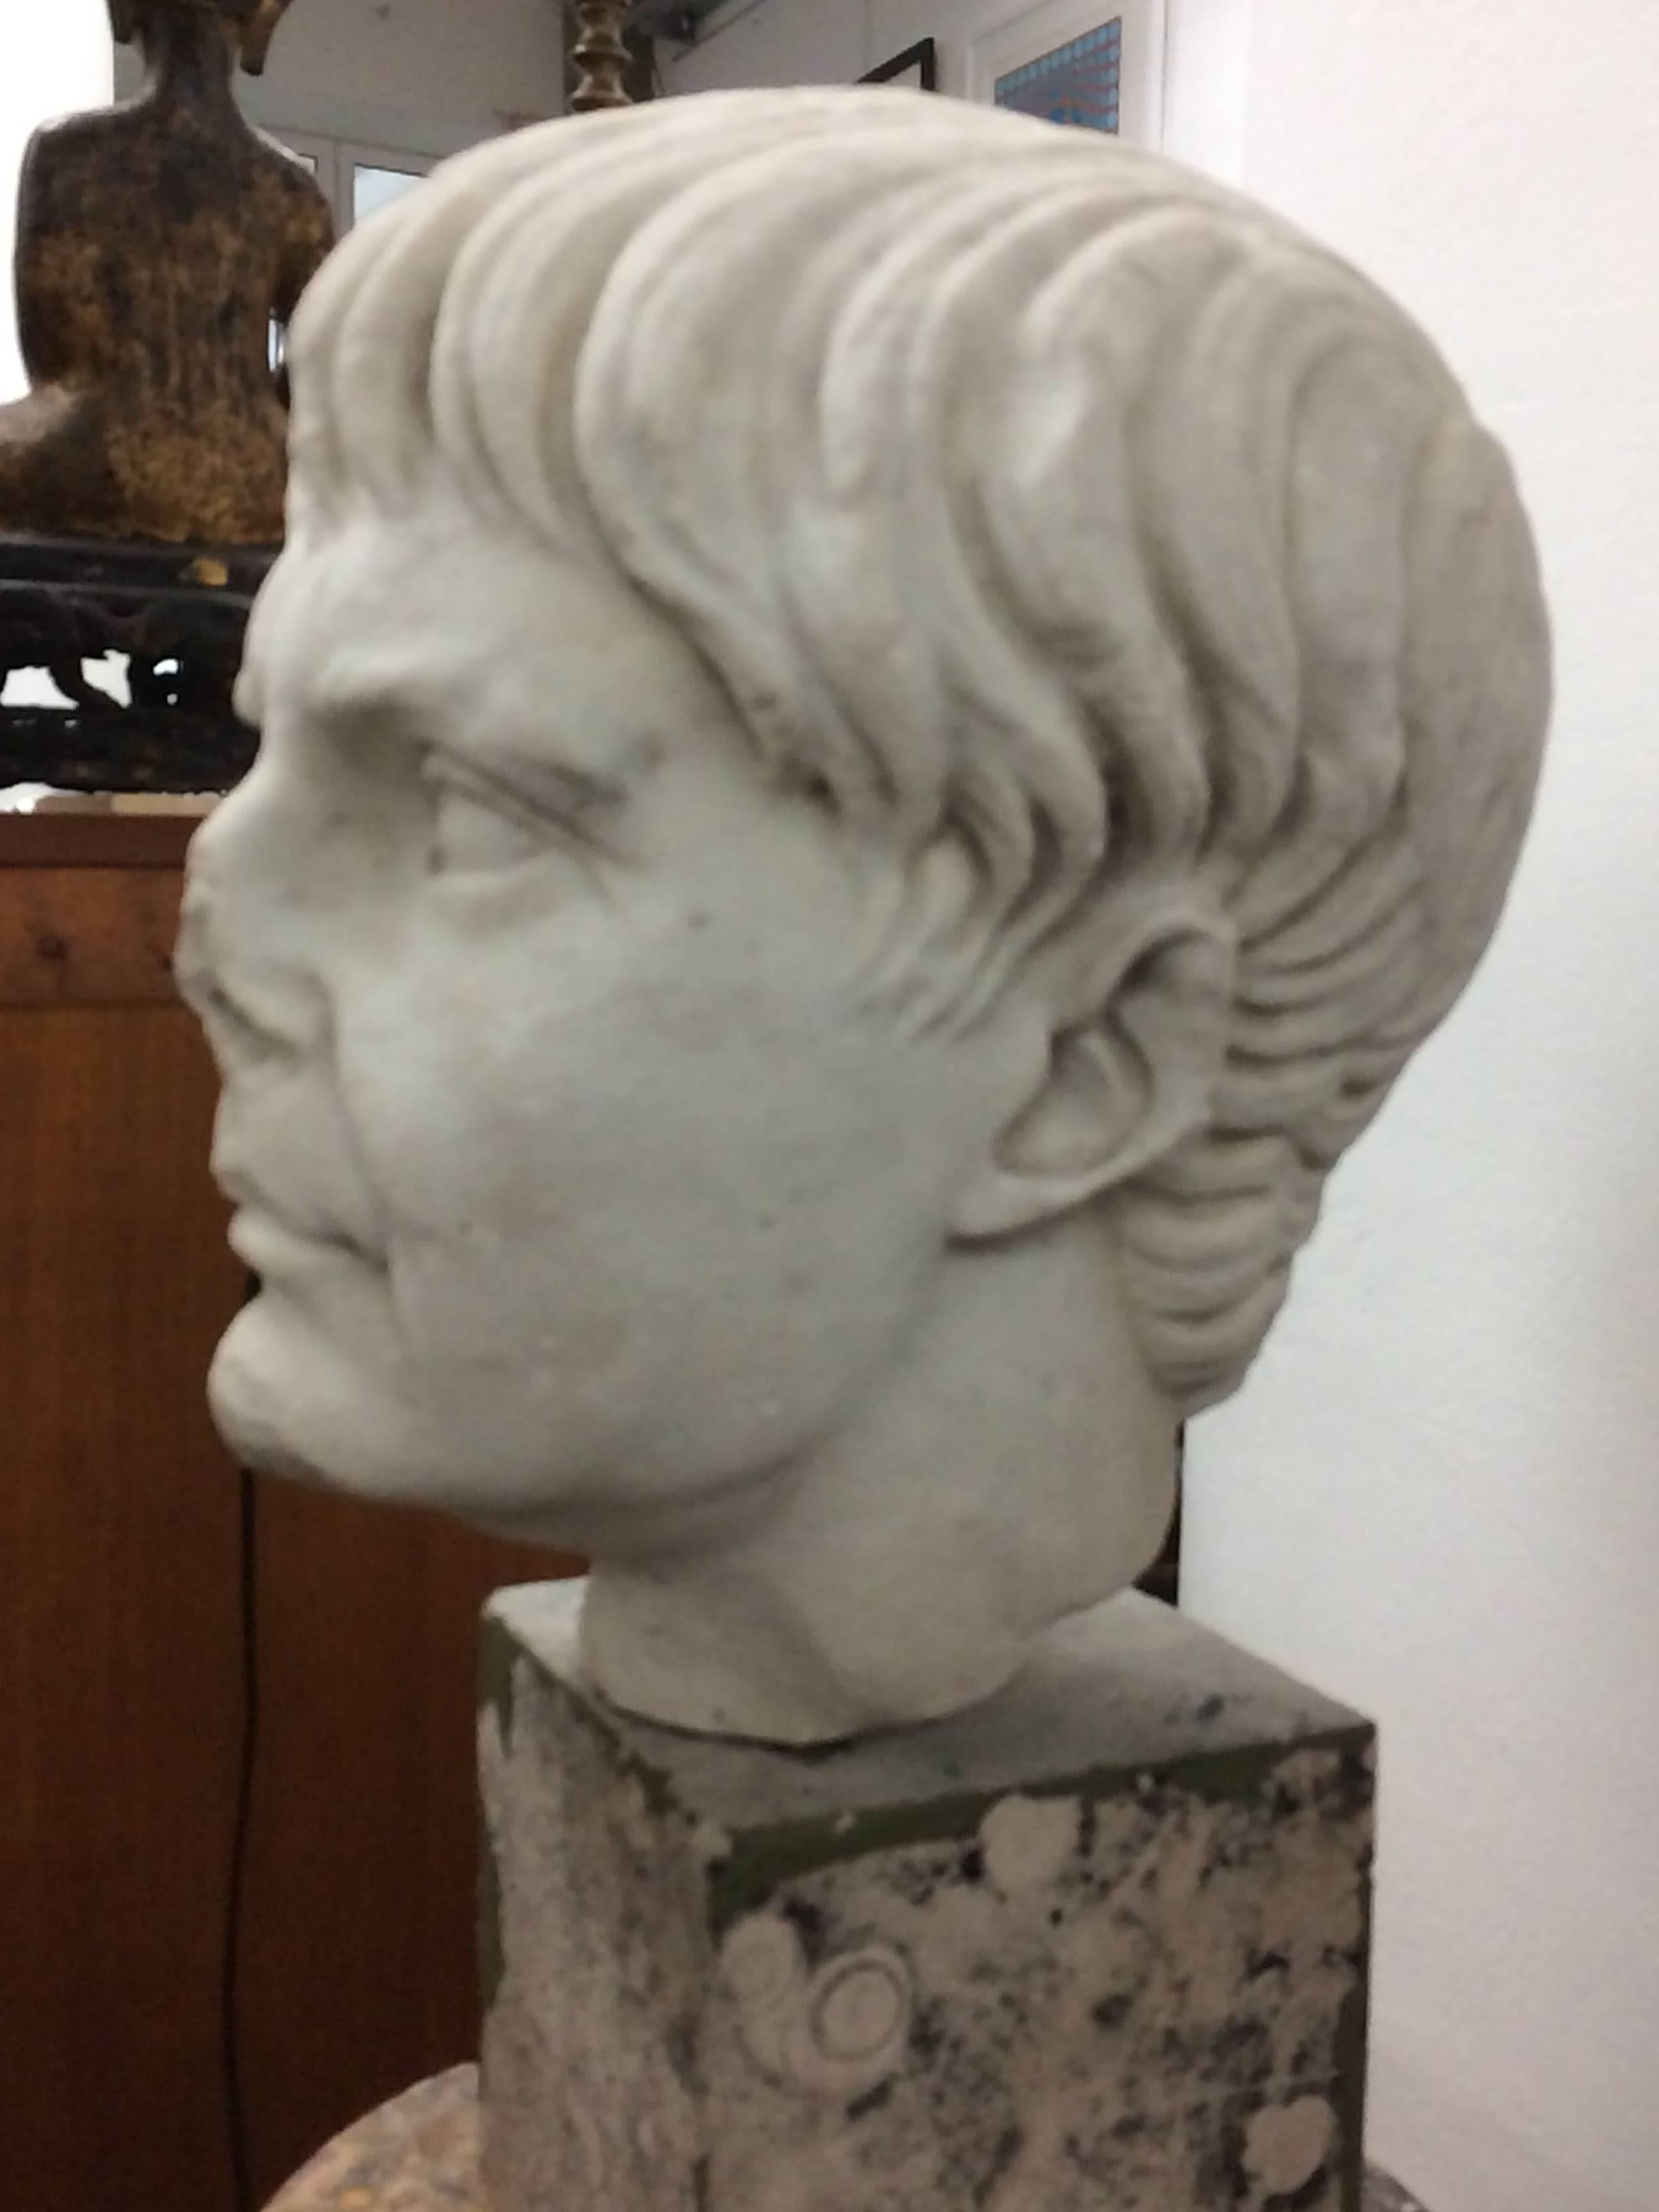 Roman marble head 1st century after Christ - has been cleaned - certificate of authenticity joined - 30 H /25 W/27 D cm